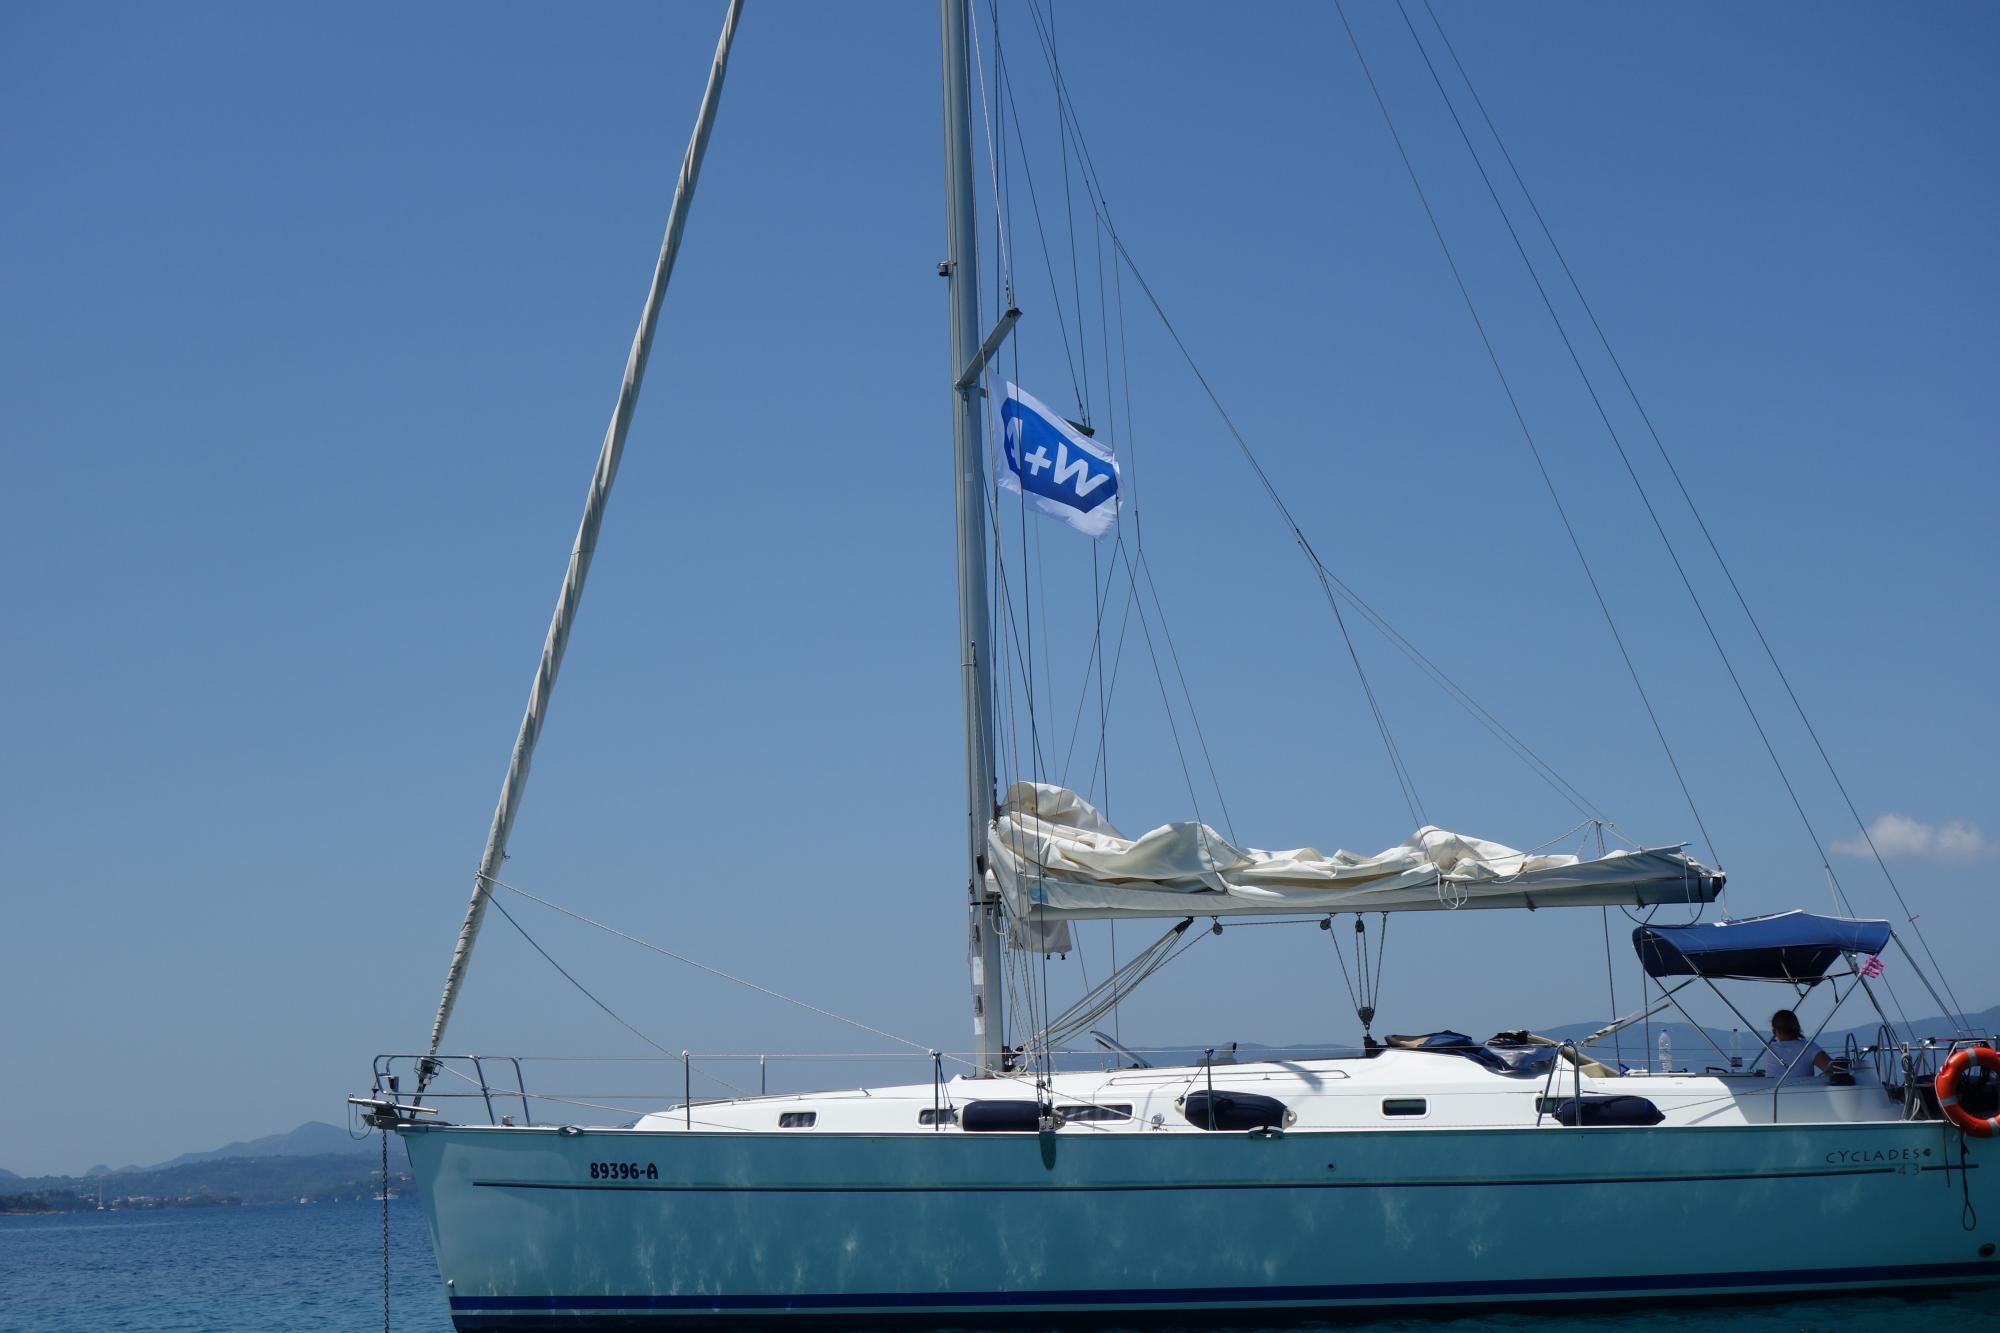 The "Sundowner", the boat of the initiators Jessica and Stefan, is flying the A+W flag.